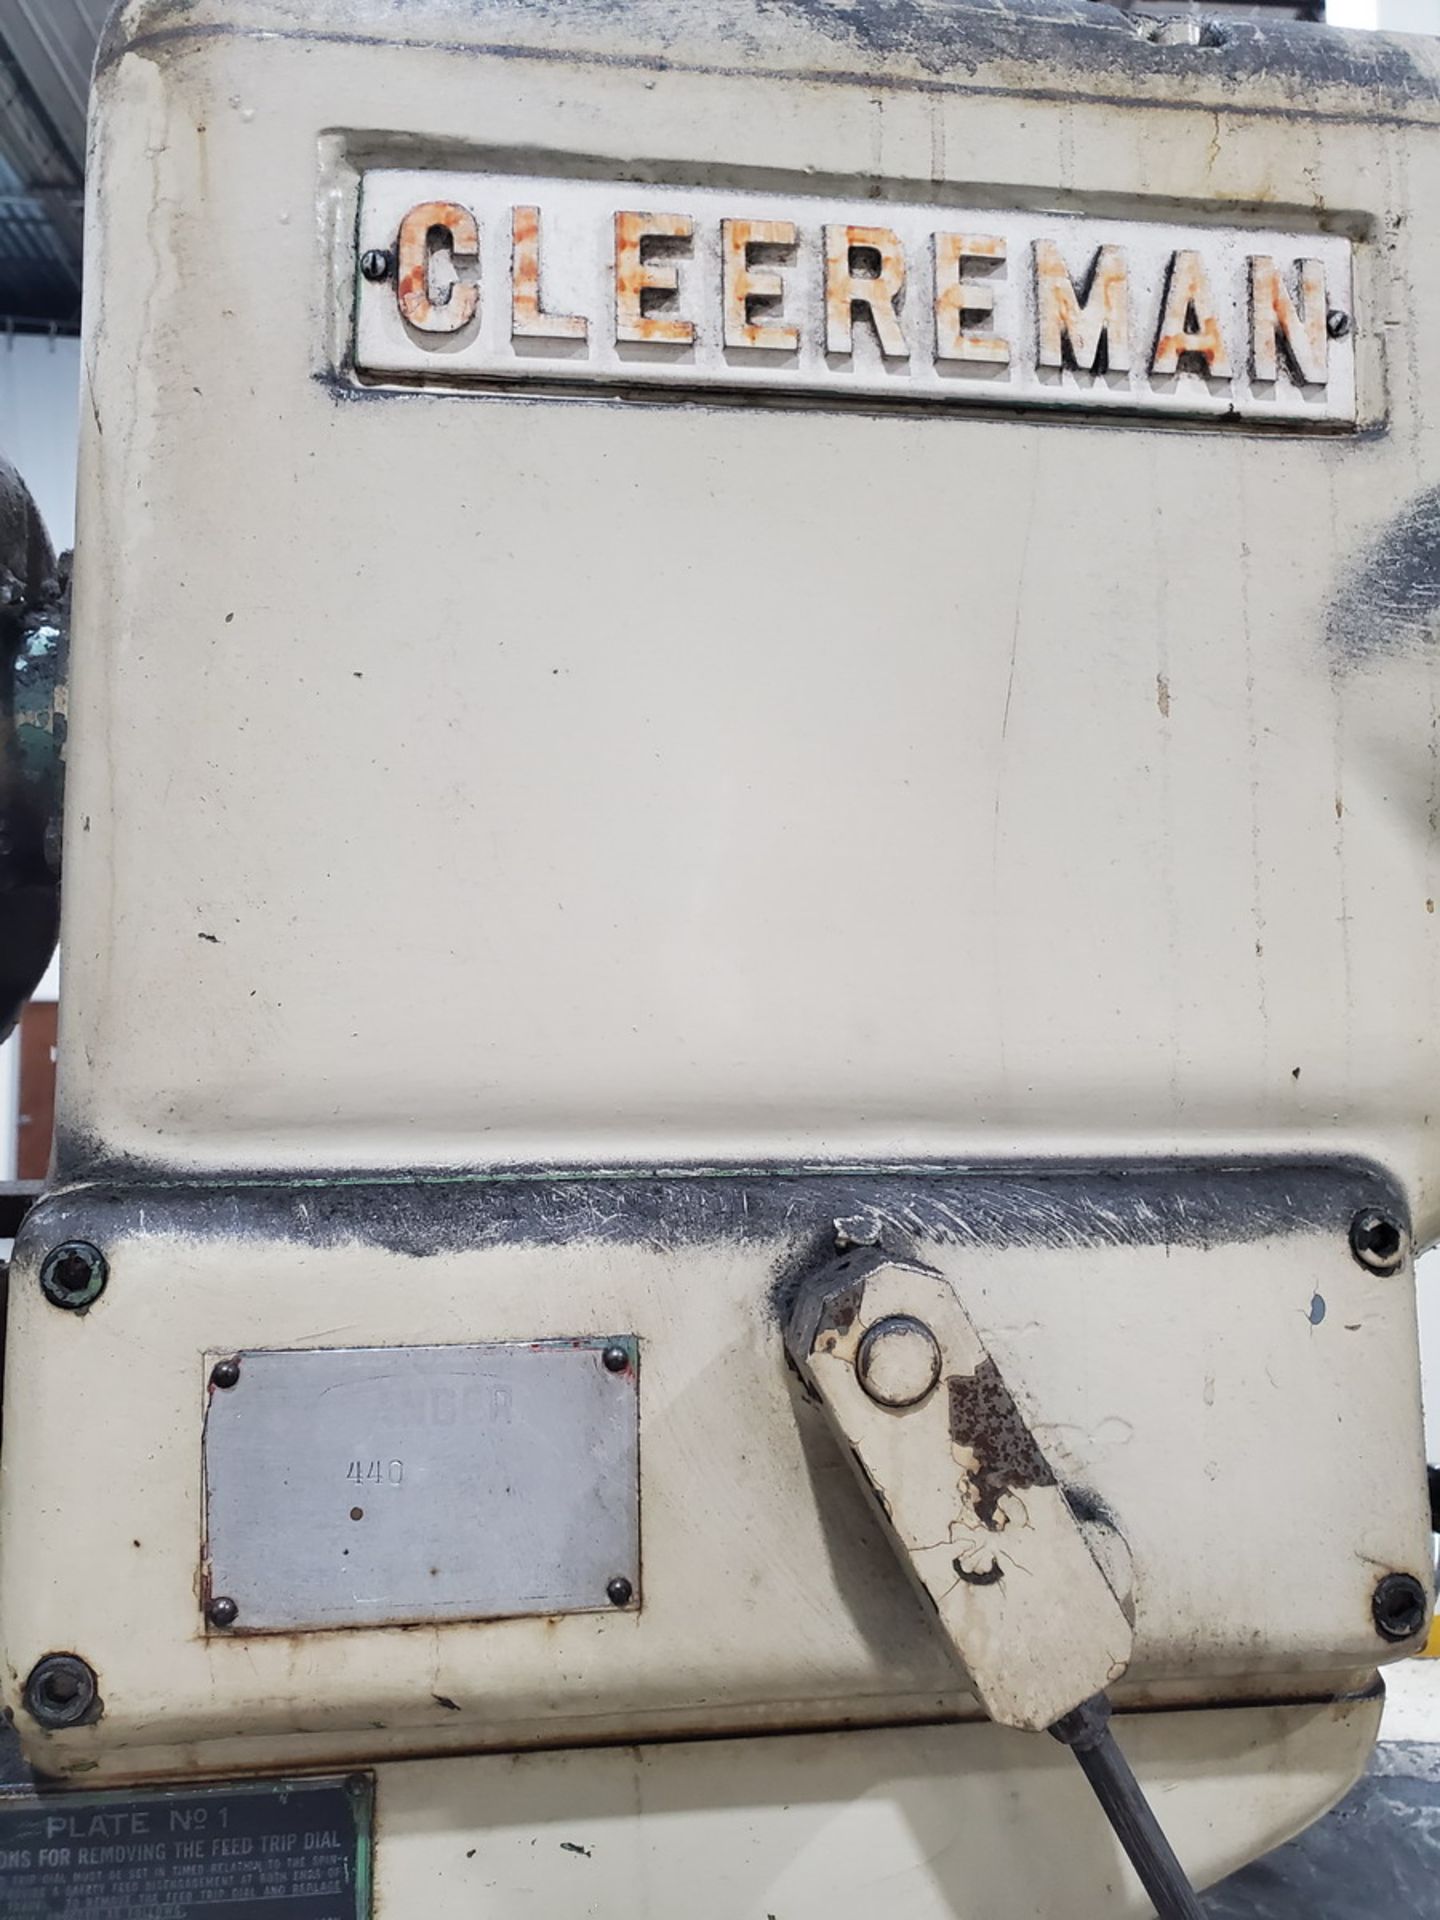 Cleerman 28" Drill Press (No Tag) 480V; 30" x 16-1/2" Slot Table; VICE NOT INCLUDED - Image 19 of 19